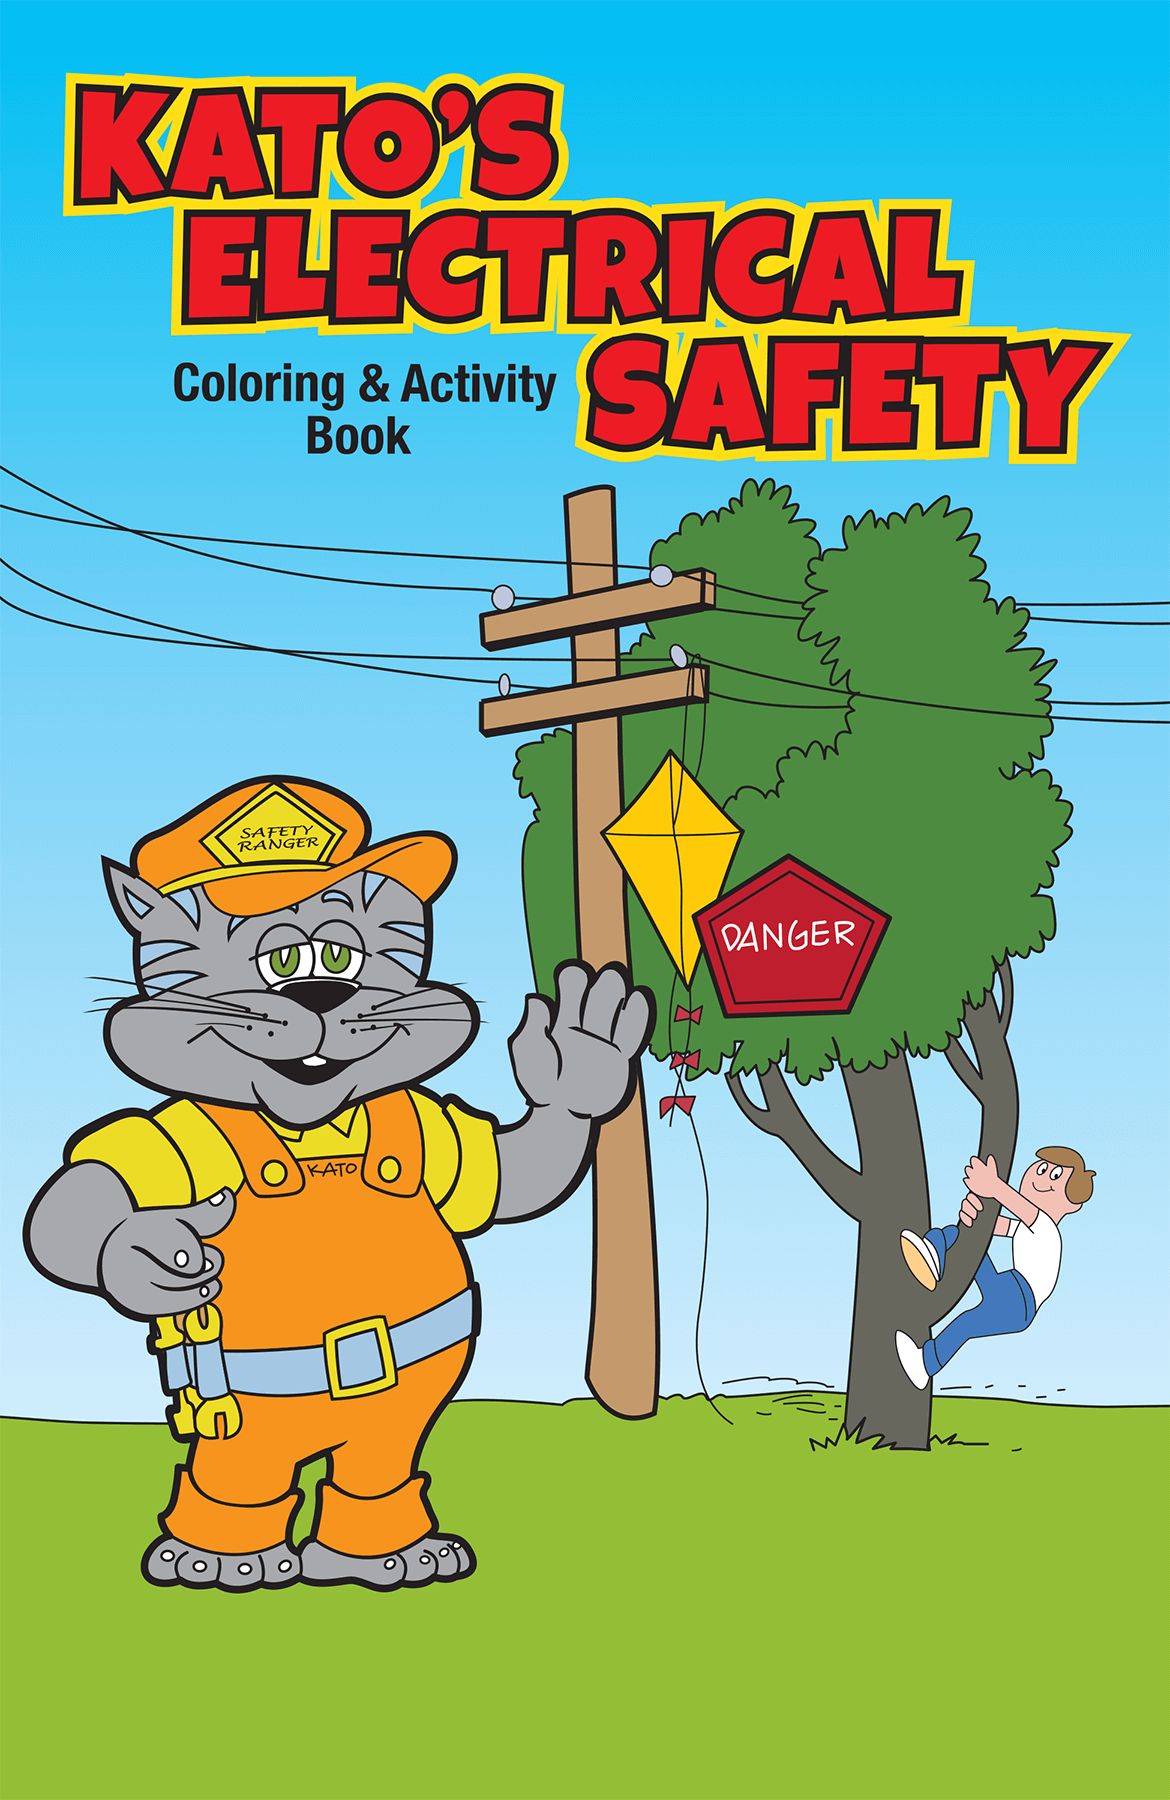 Illustrated Katos Electrical Safety Coloring and Activity Book cover